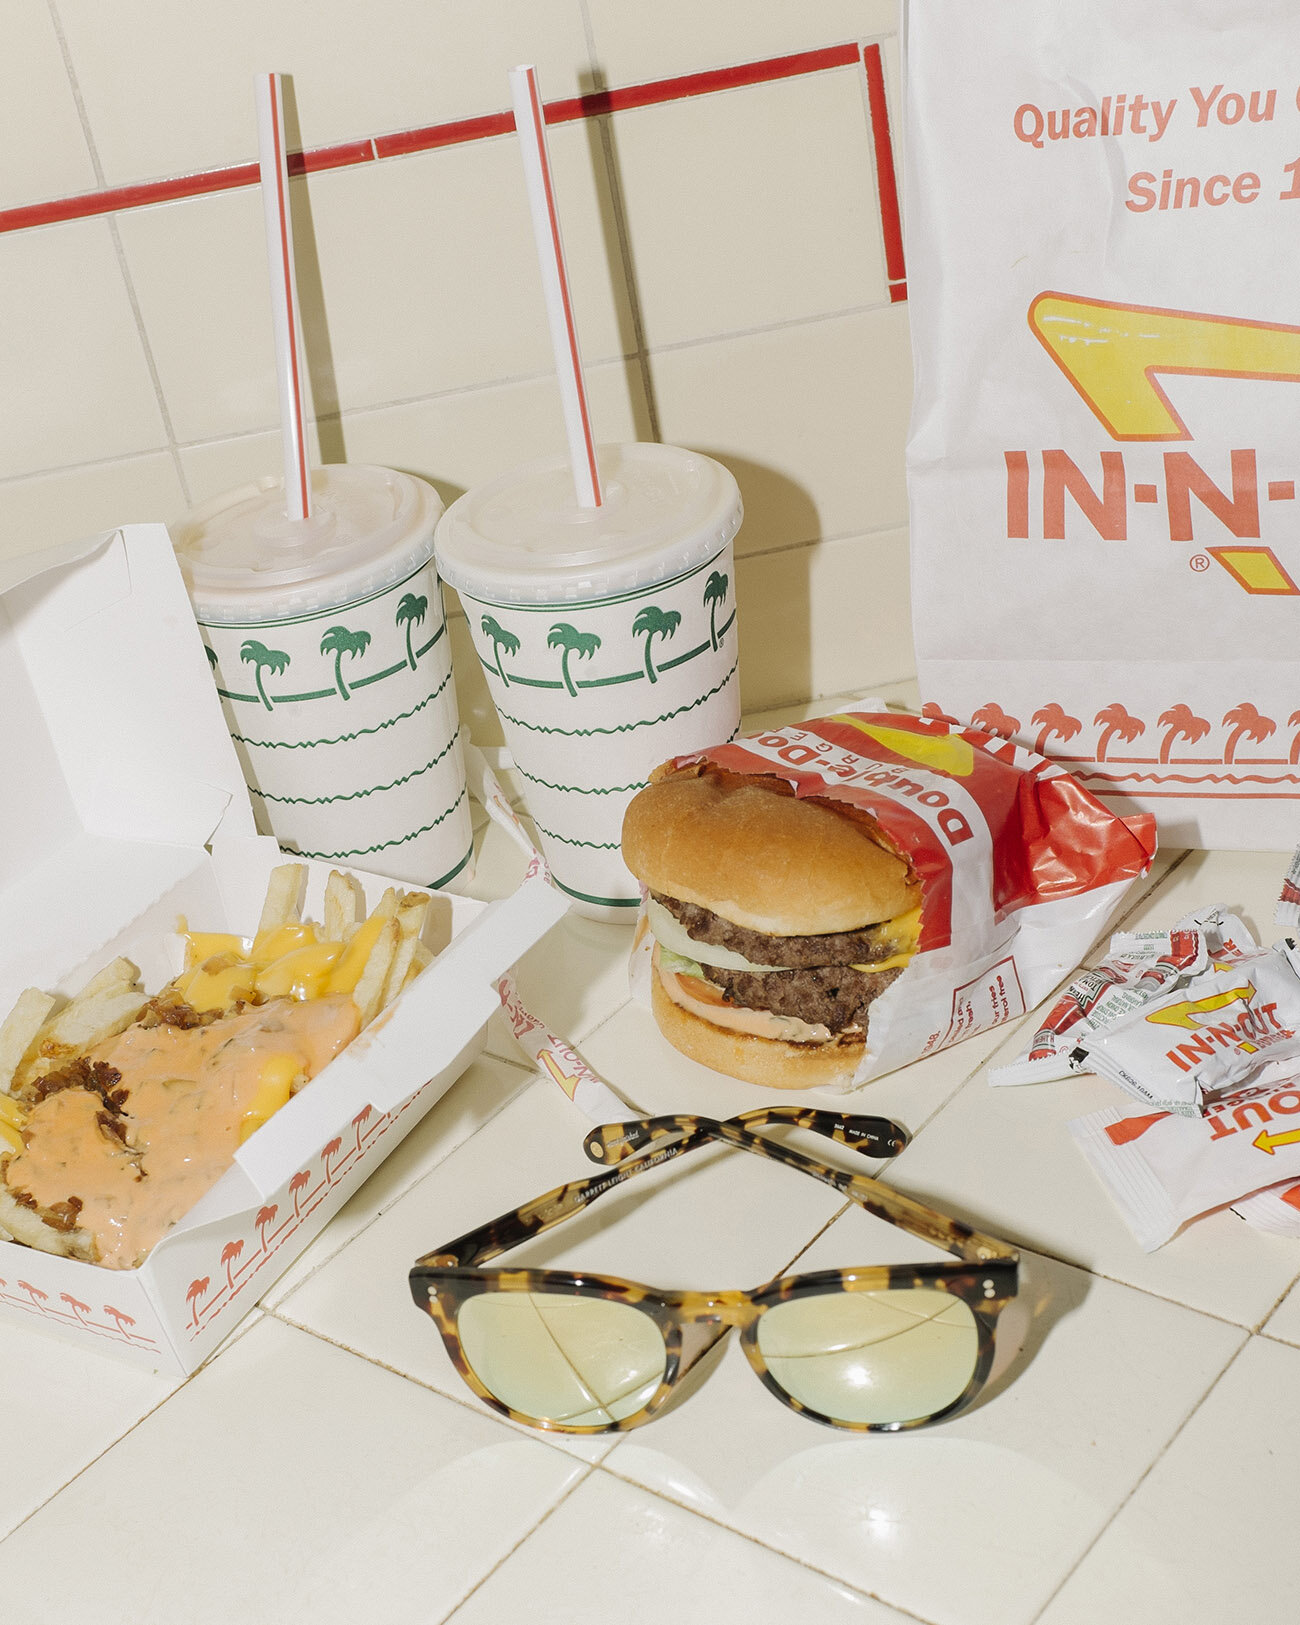 NEW_0001_IN-N-OUT-STILL-LIFES-BY-IAN-FLANIGAN-01.jpg